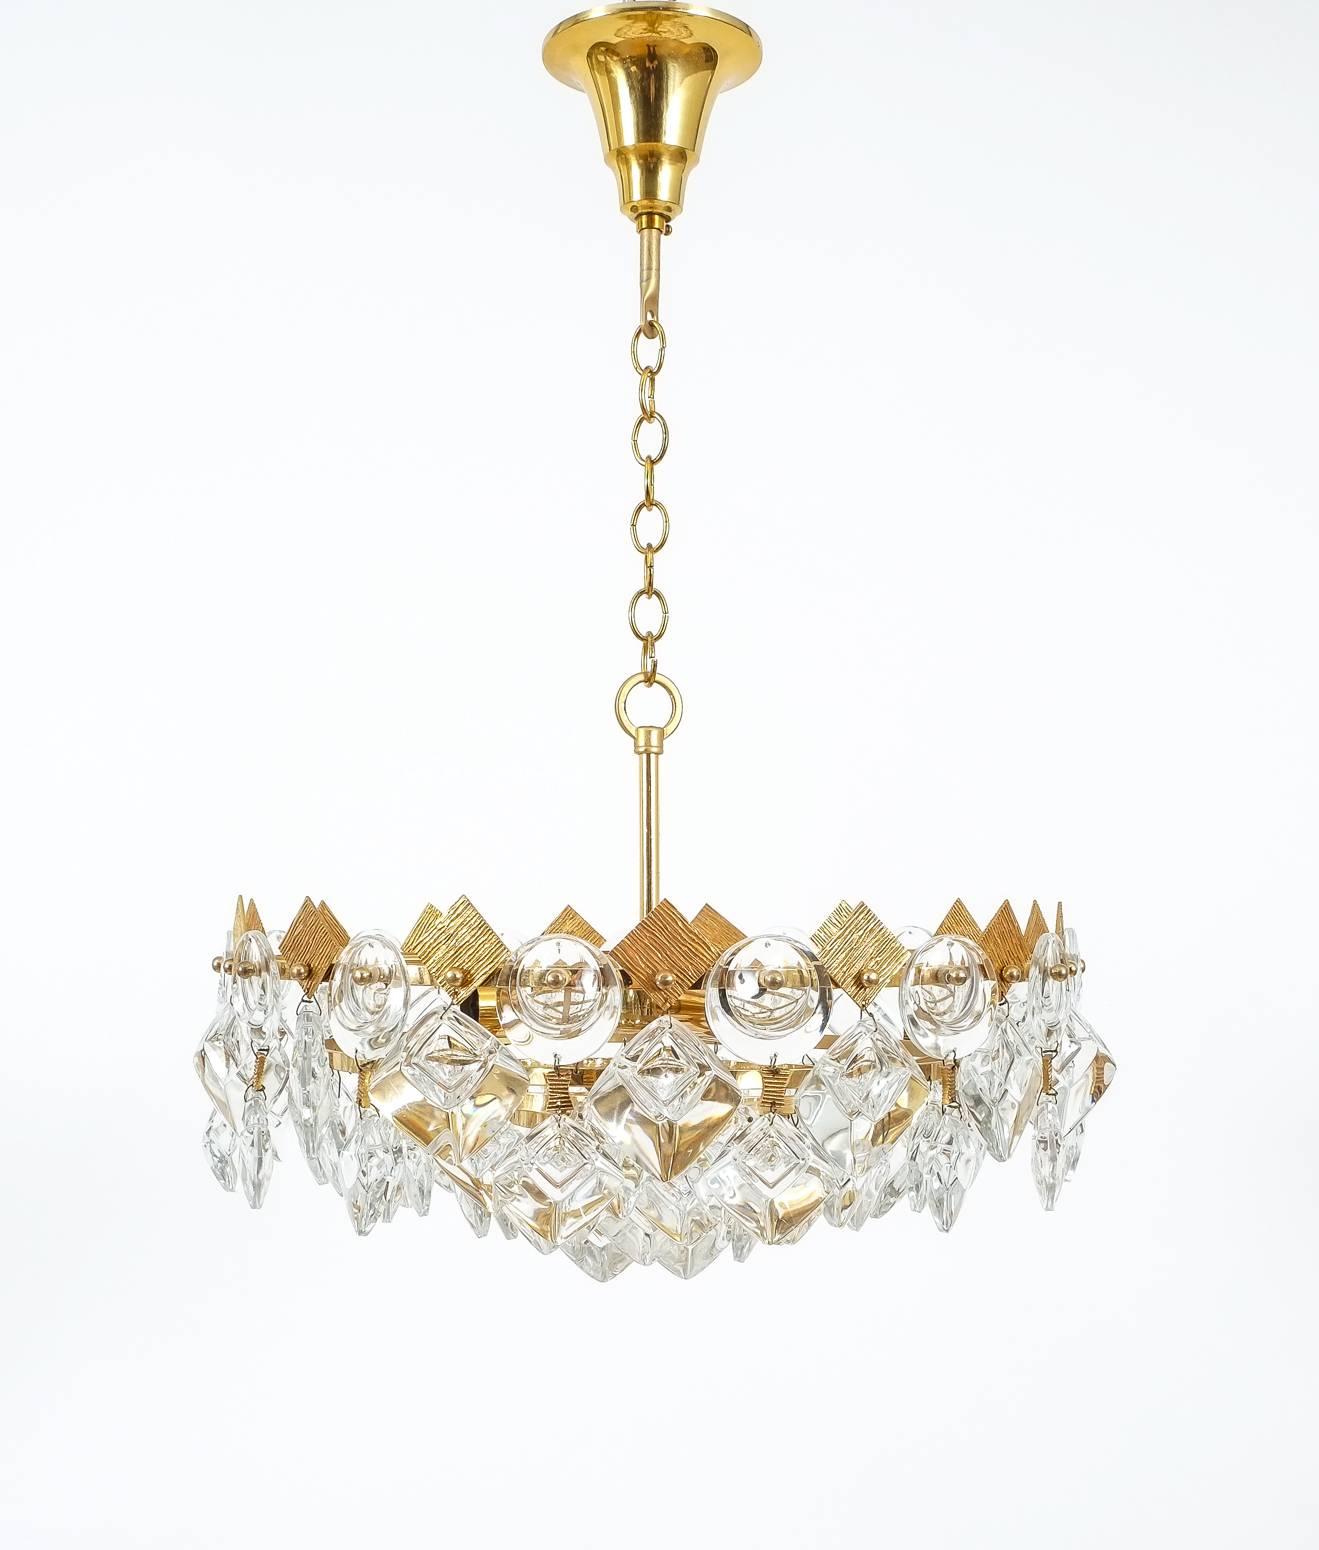 Hollywood Regency Petite Gilded Brass and Glass Chandelier Lamp by Palwa, 1970 For Sale